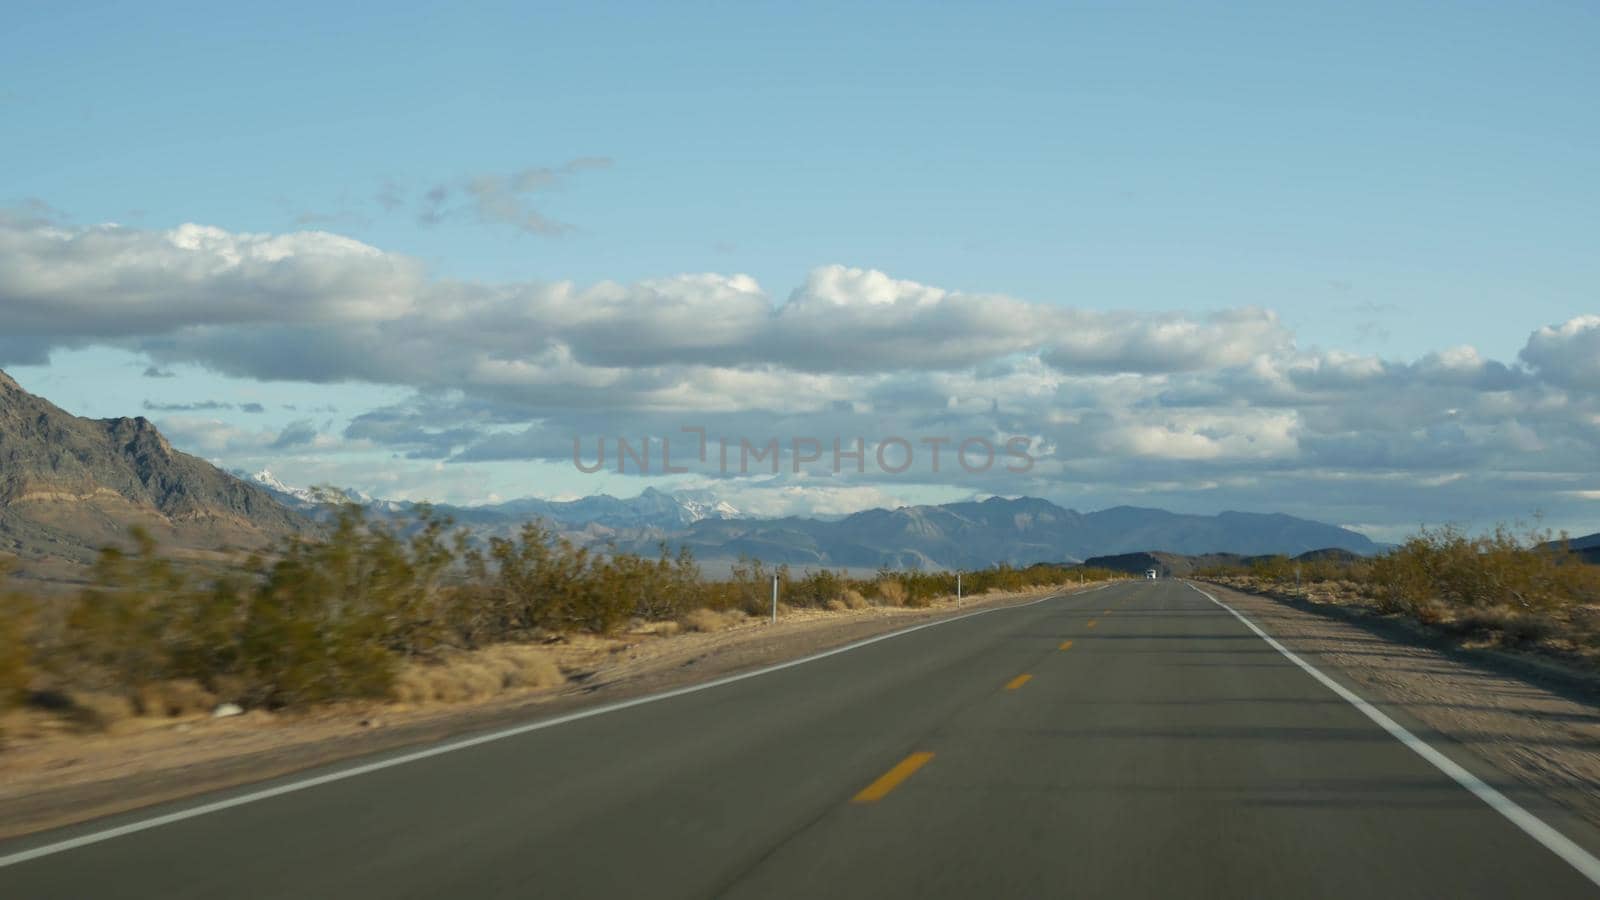 Road trip, driving auto from Death Valley to Las Vegas, Nevada USA. Hitchhiking traveling in America. Highway journey, dramatic atmosphere, clouds, mountain and Mojave desert wilderness. View from car